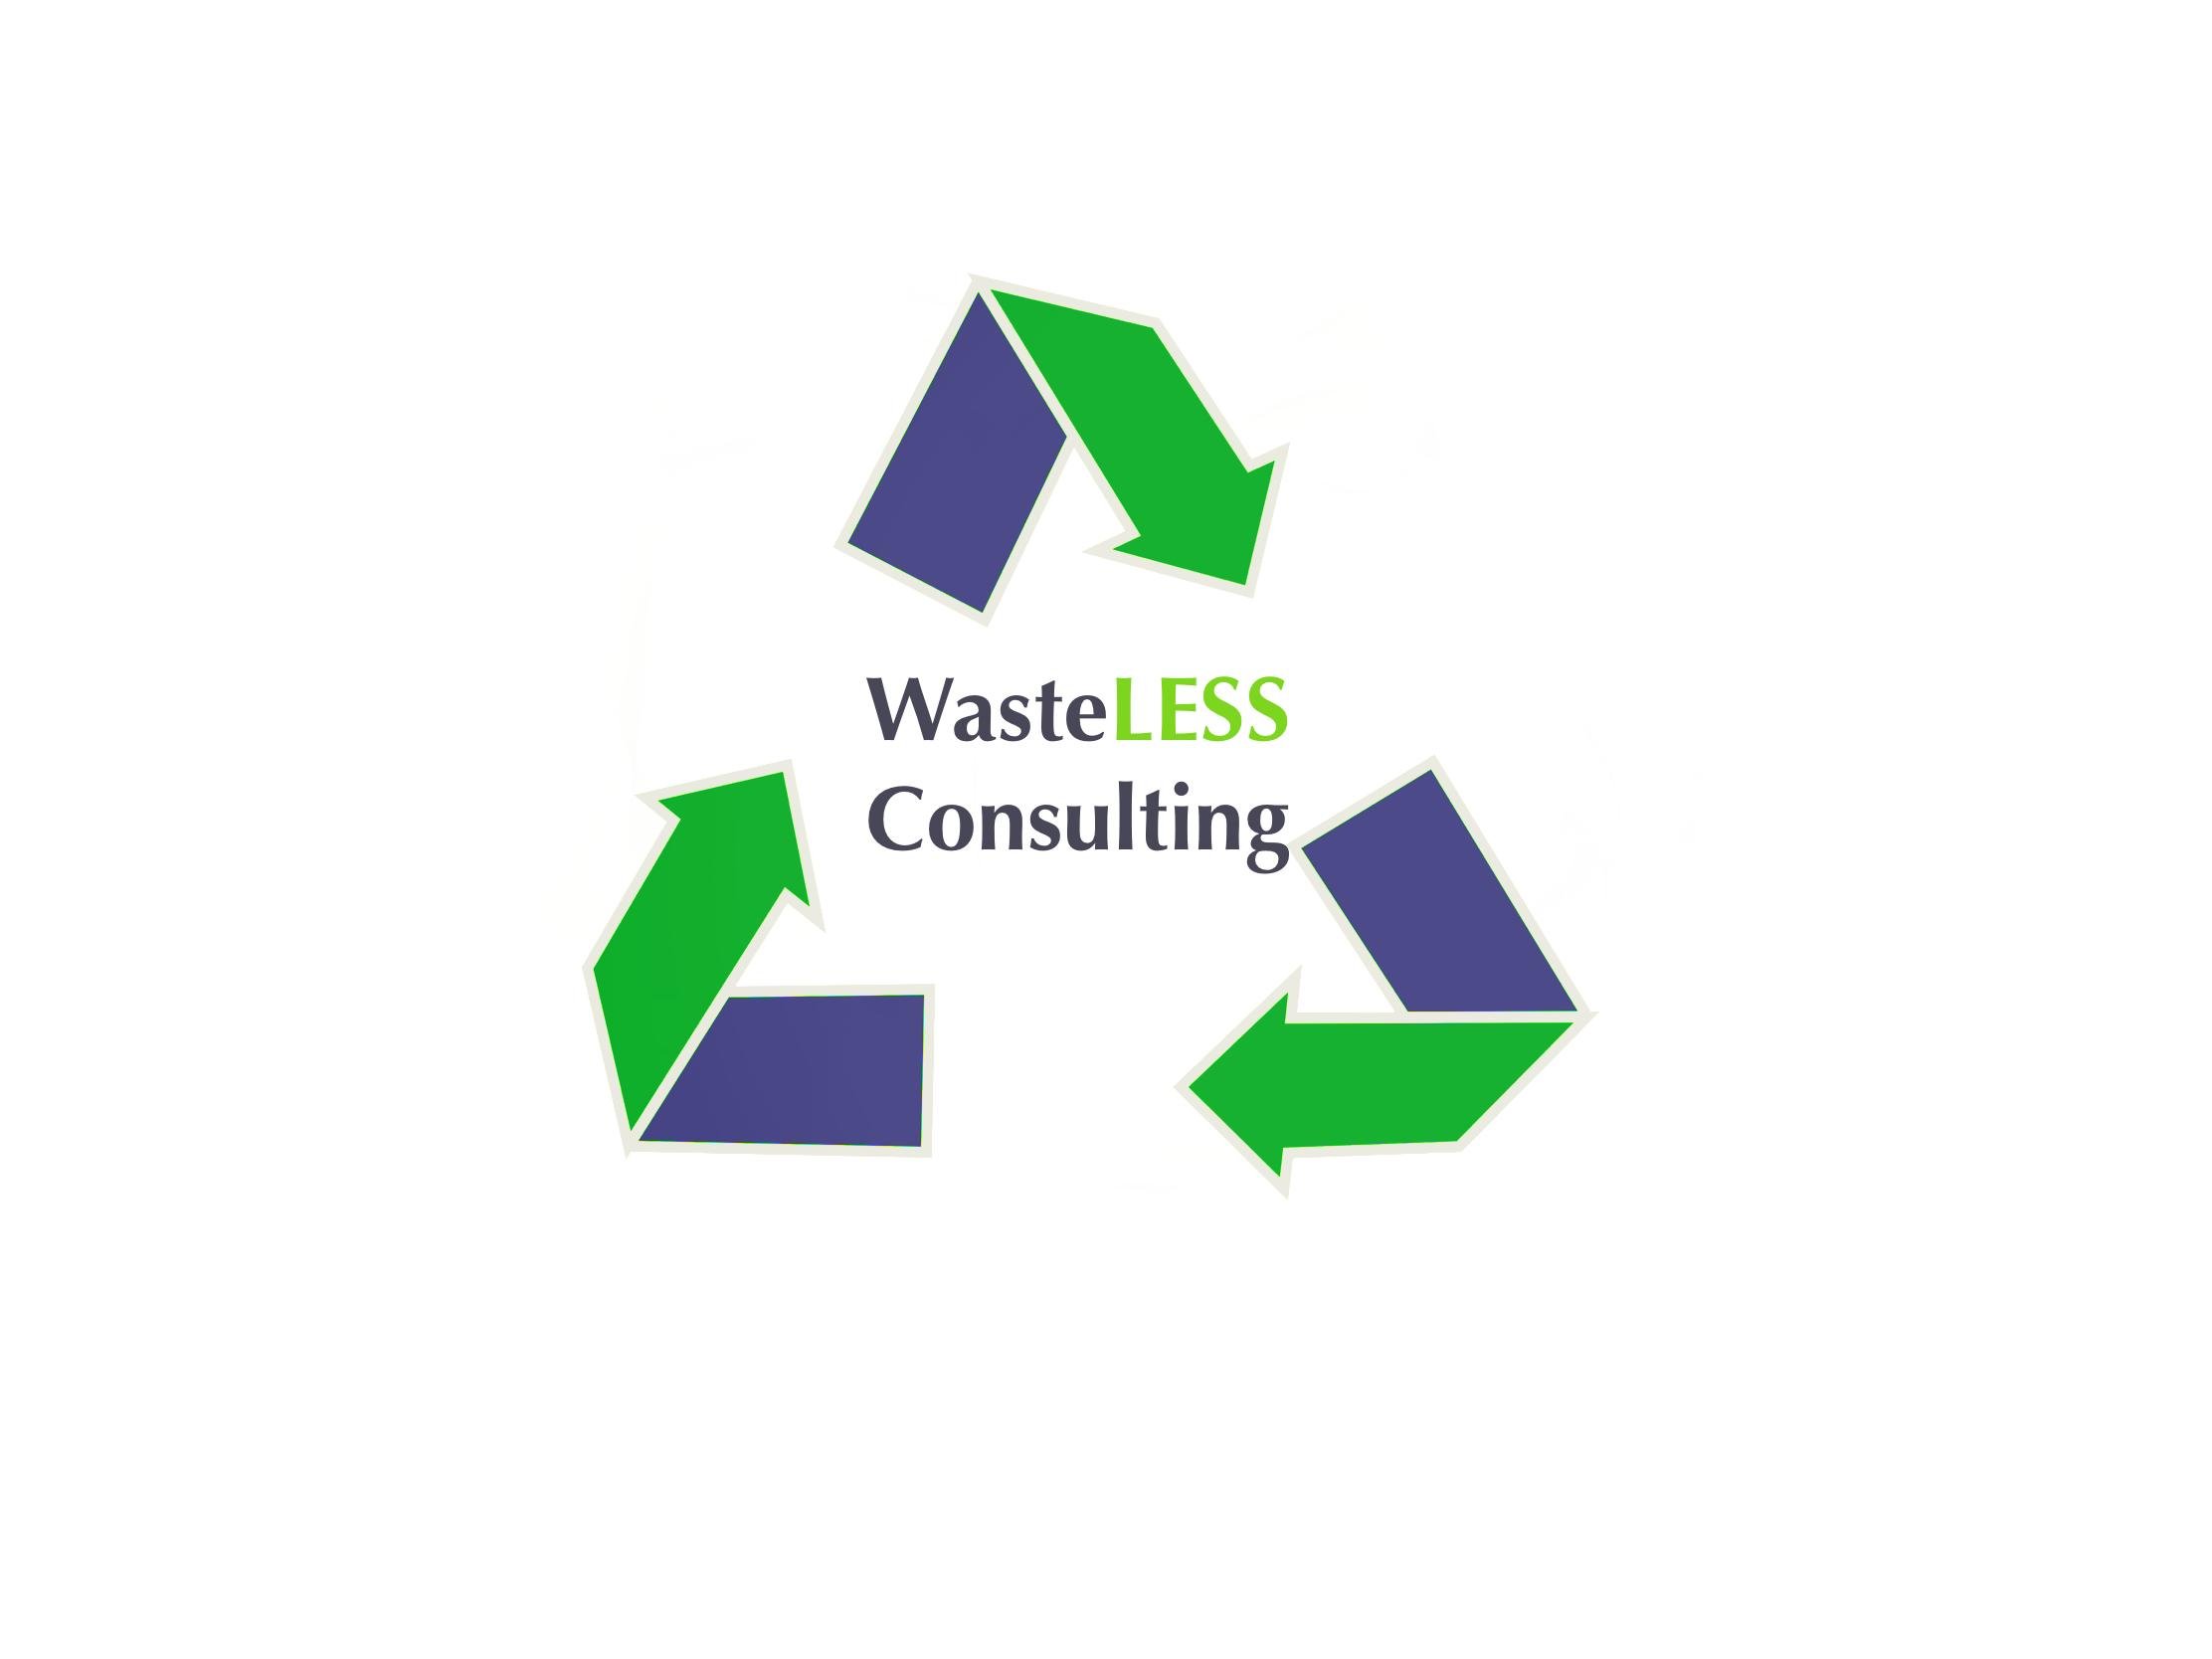 WasteLESS Consulting was created to help companies realise their visions of sustainable business. We will be your guide to better for your company & the planet.